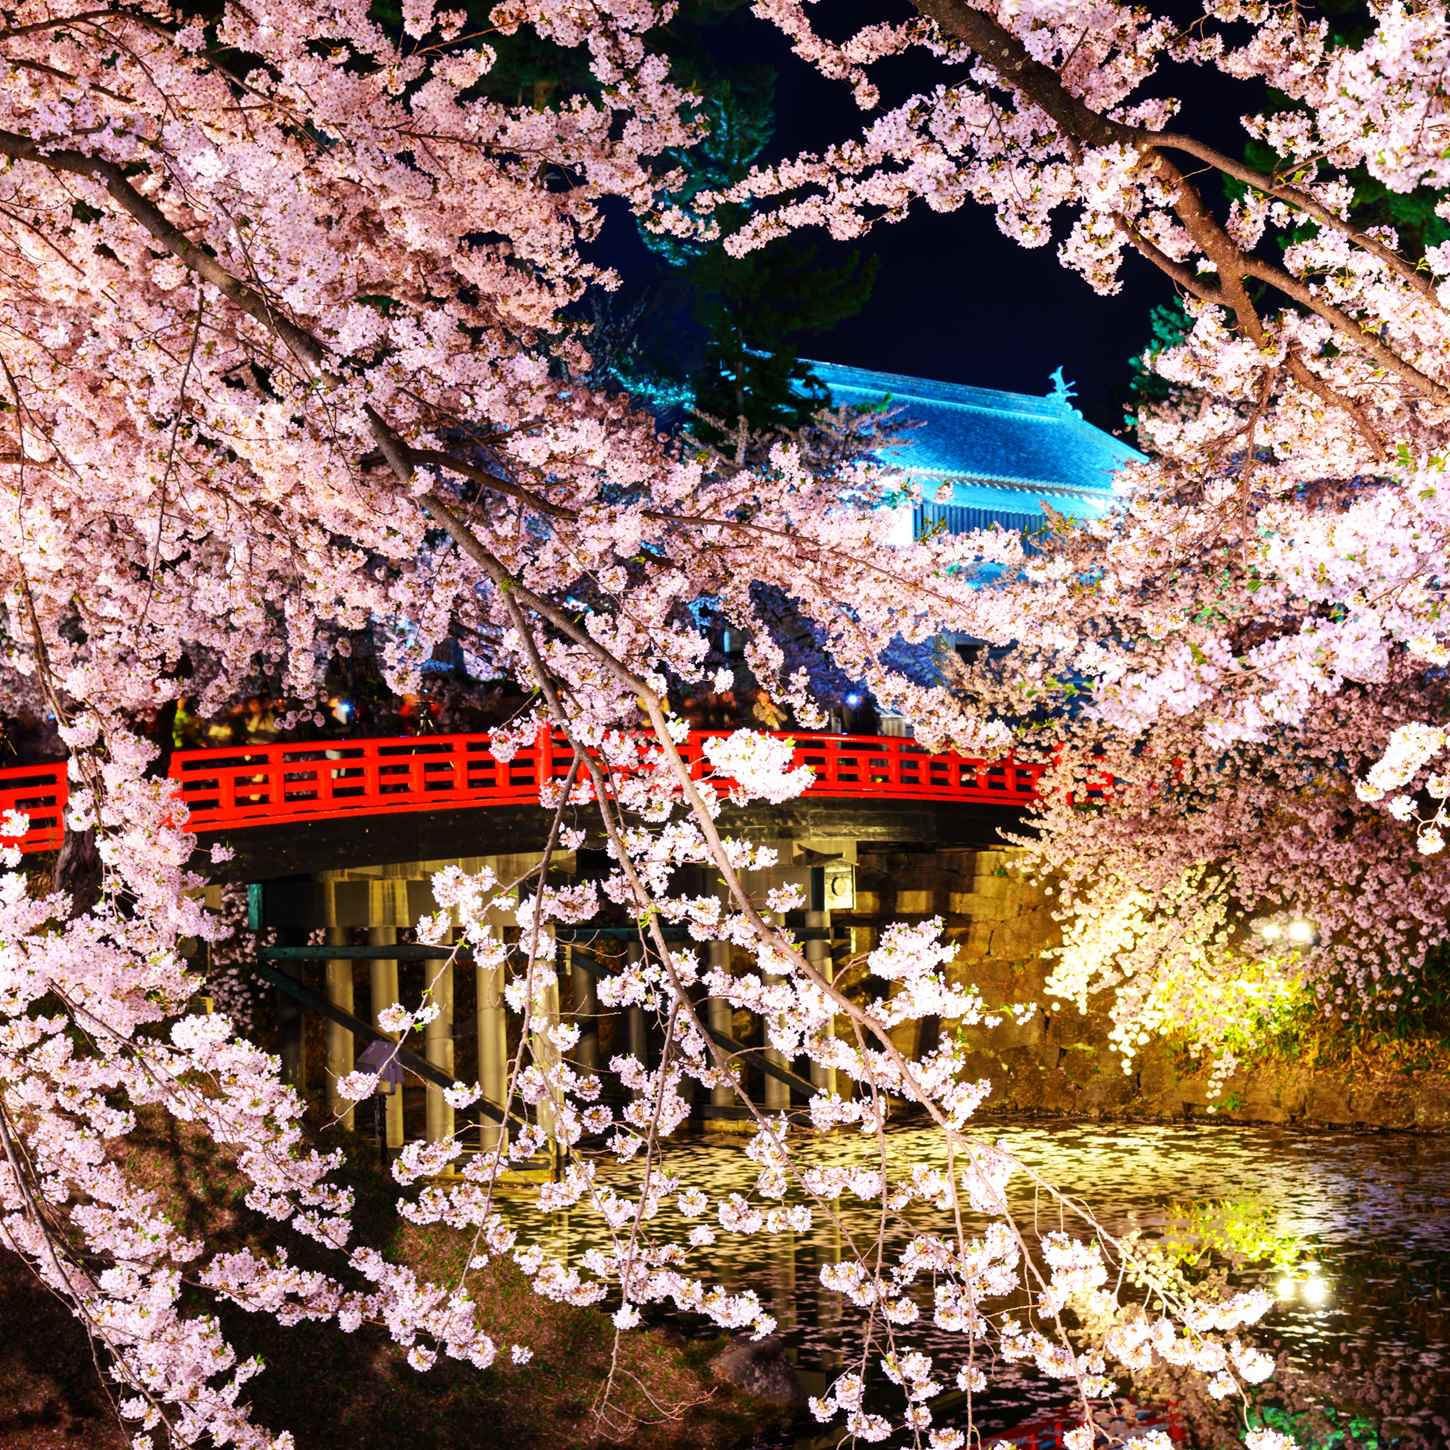 Video: Night view of cherry blossoms at Hirosaki Castle